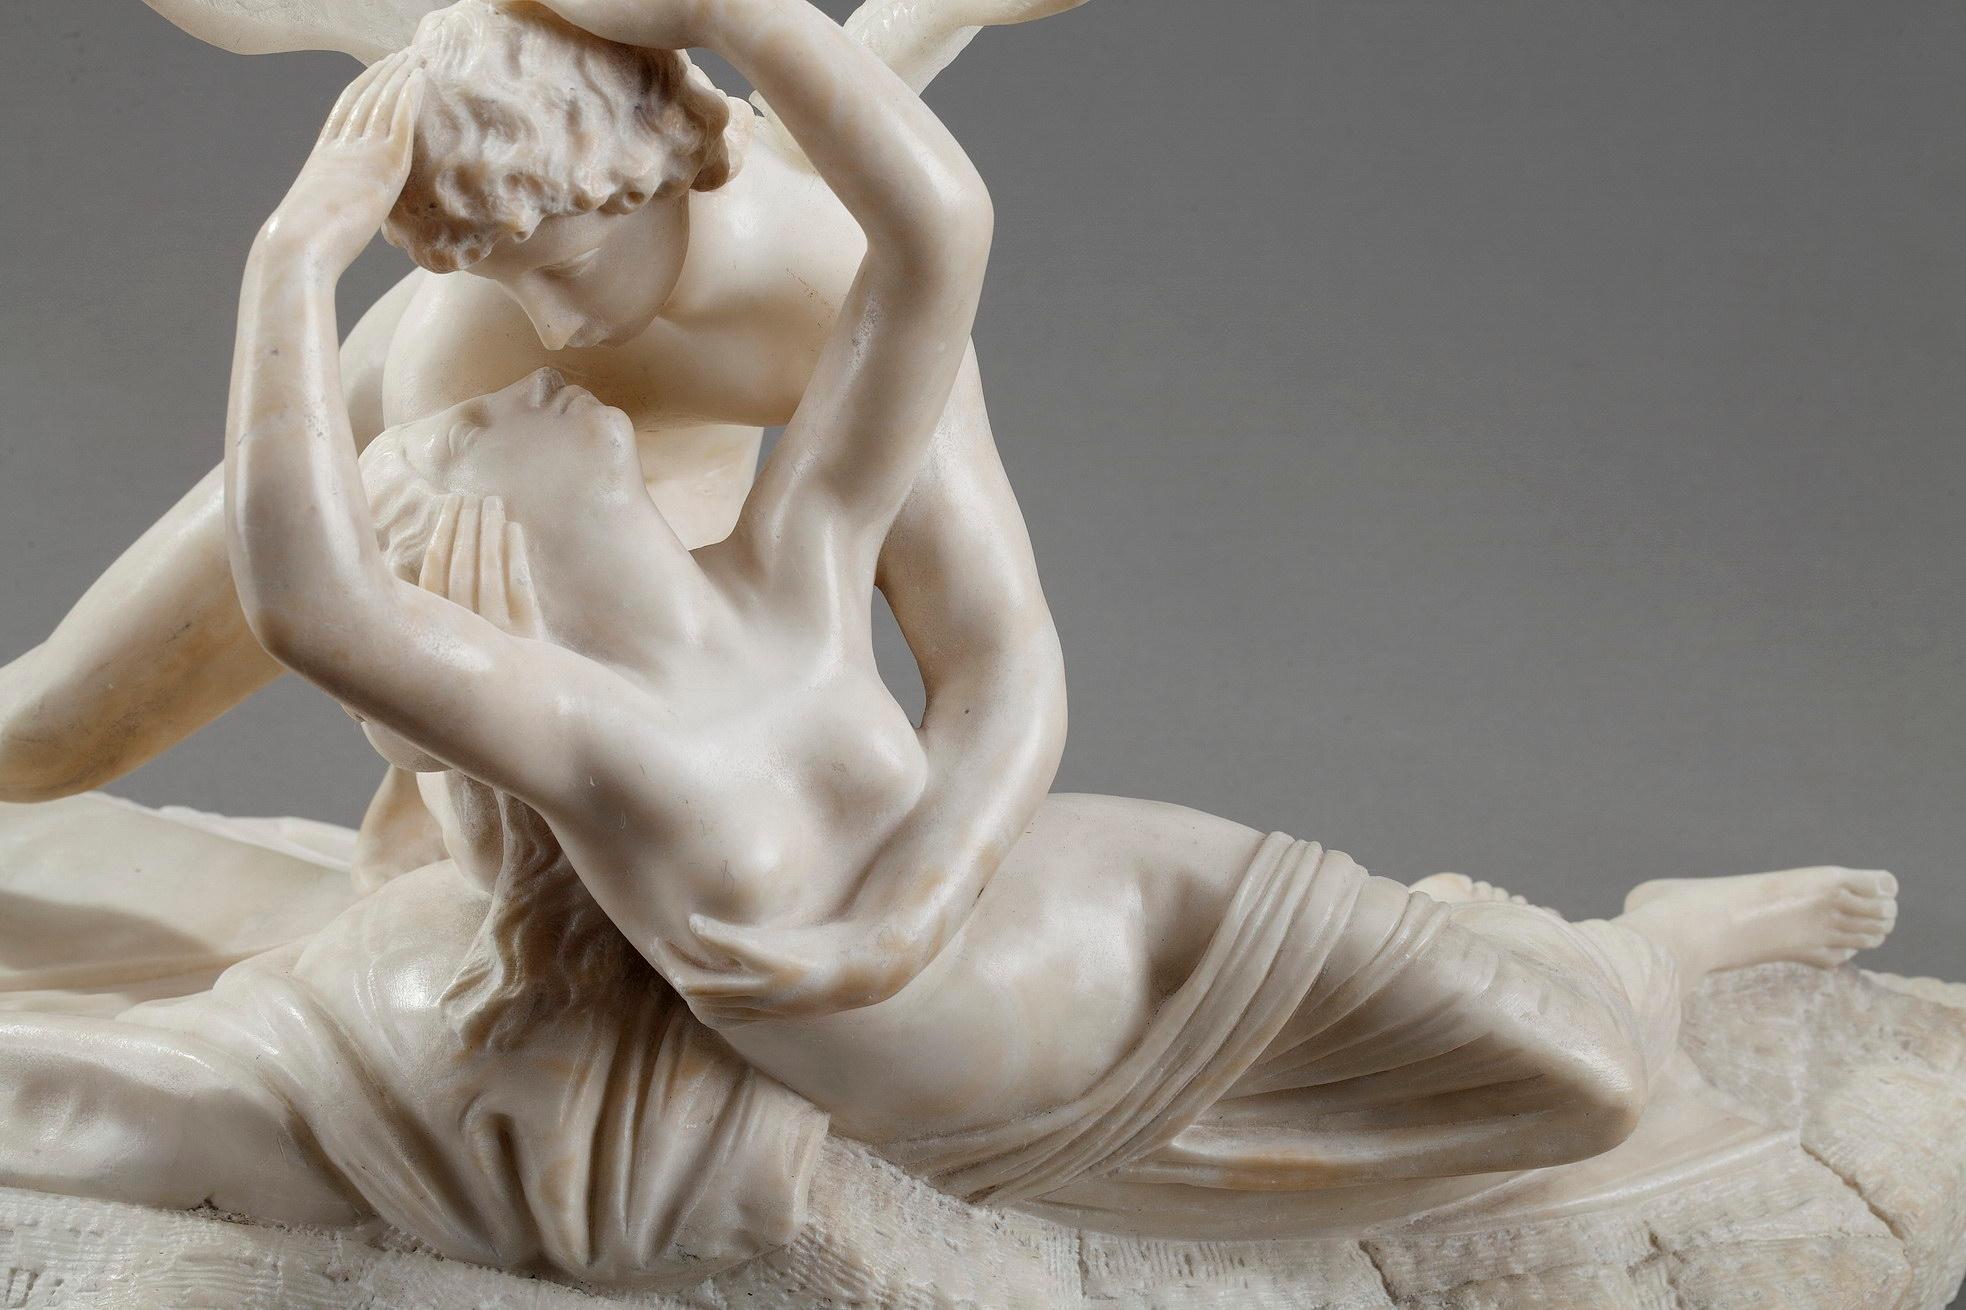 Alabaster group of Psyché ranimée par le baiser de l'Amour (Psyche Revived by Cupid’s Kiss) by the Italian sculptor Antonio Canova (1757-1822). The story of Cupid and Psyche was a popular artistic choice in the neoclassical period. Canova produced